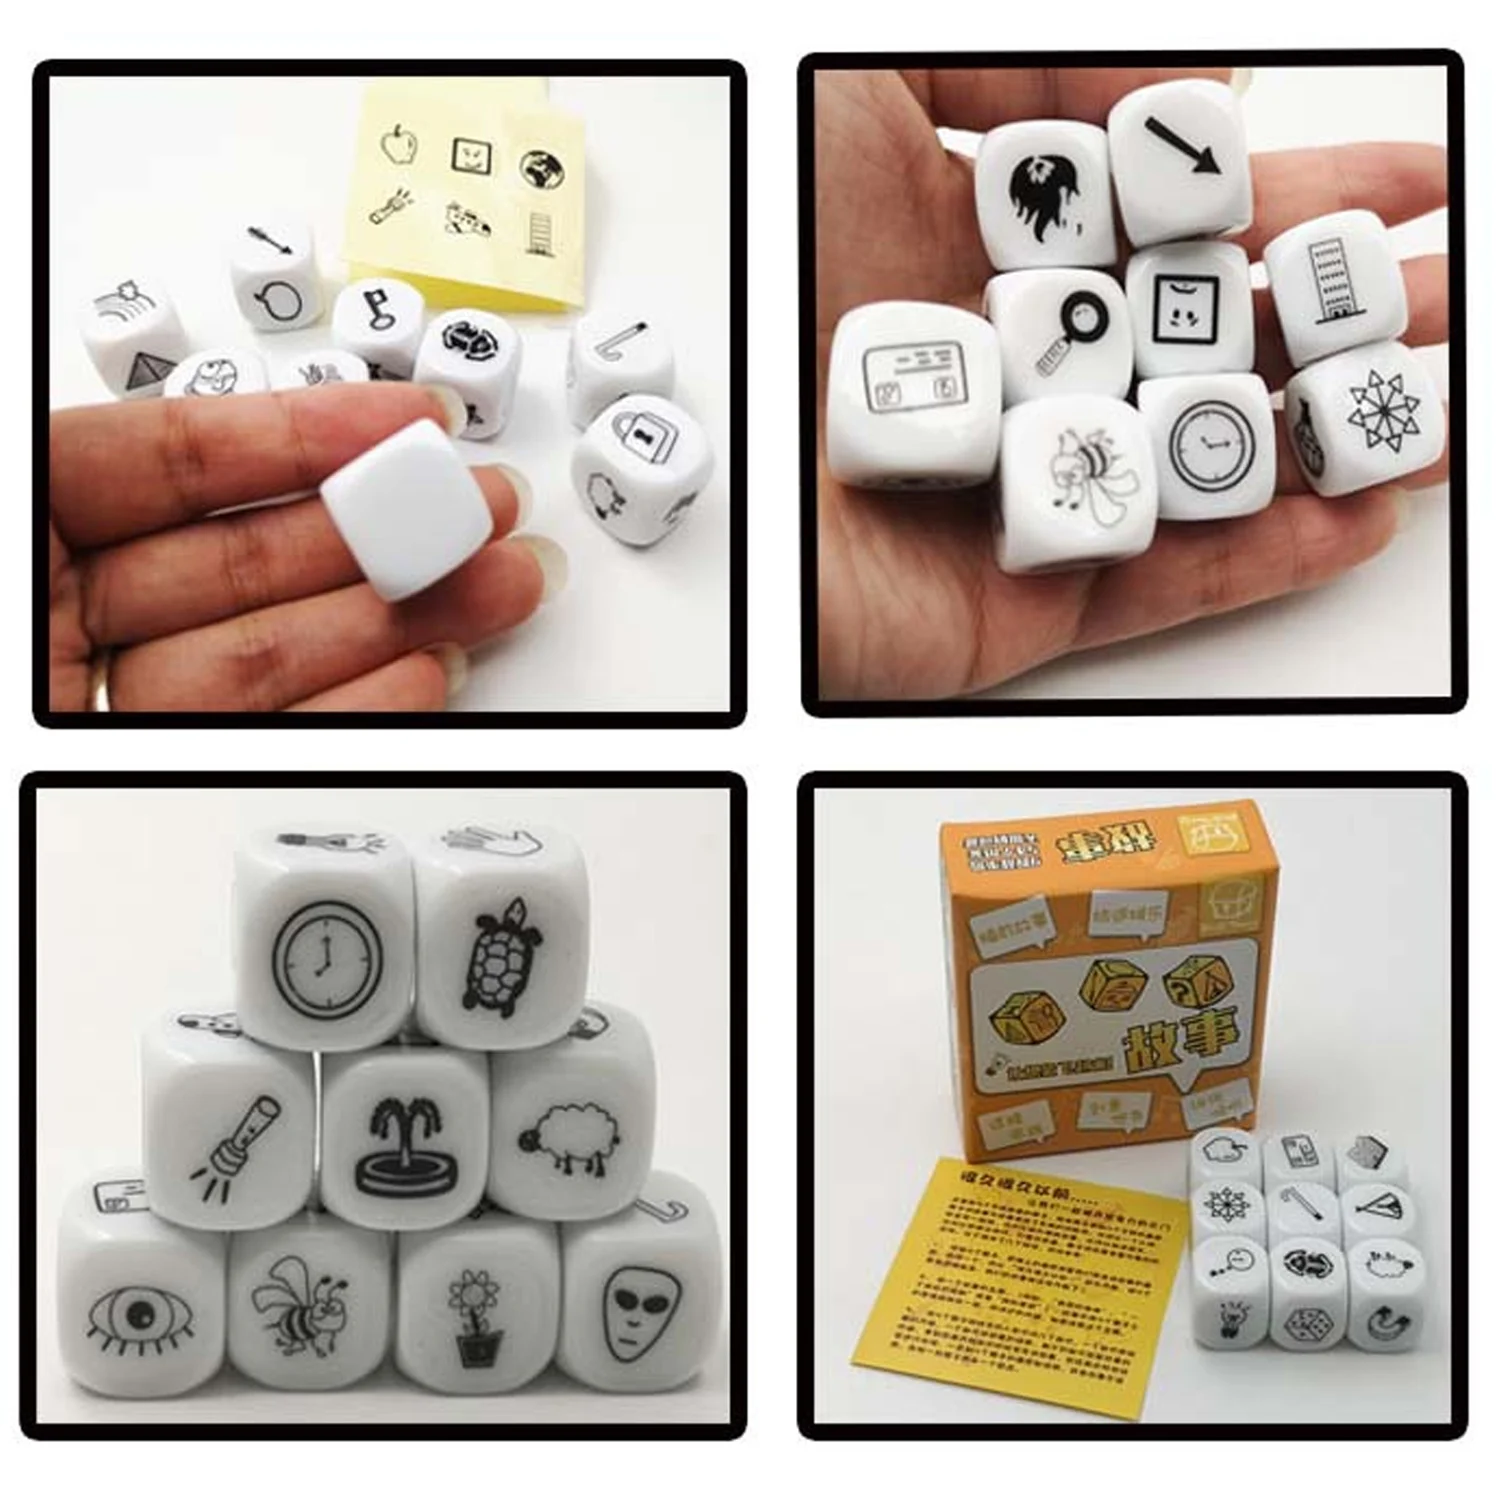 

9pcs Cubes 54pcs Images Game Puzzle Telling Story Dice Toy for Children DIY Toddlers Storytelling Game Imaginative Play Supplies